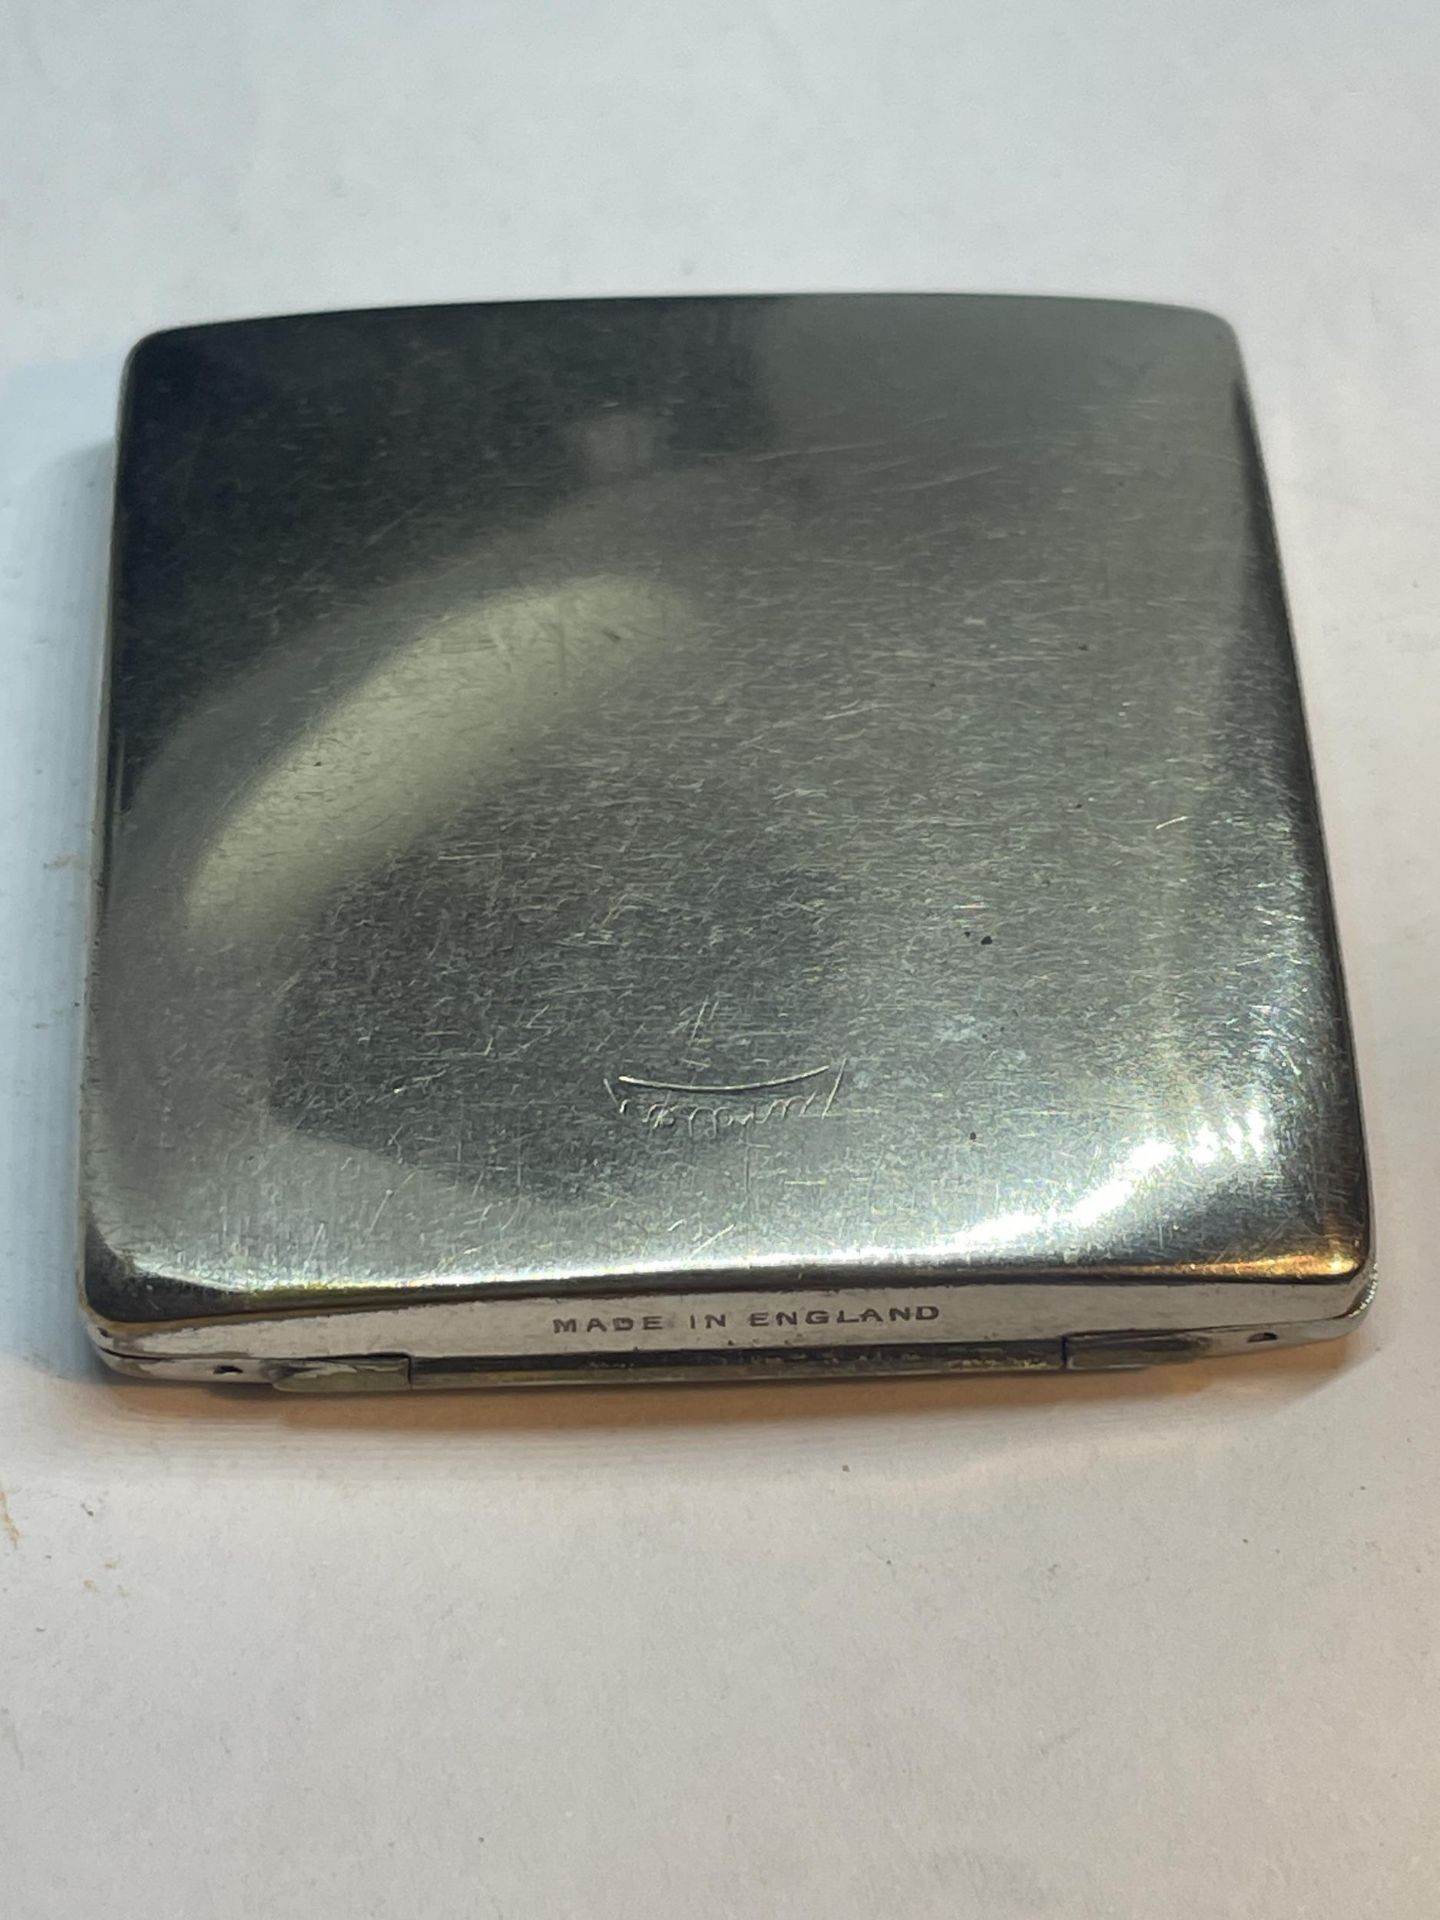 A VINTAGE YARDLEY POWDER COMPACT WITH INNER MIRROR